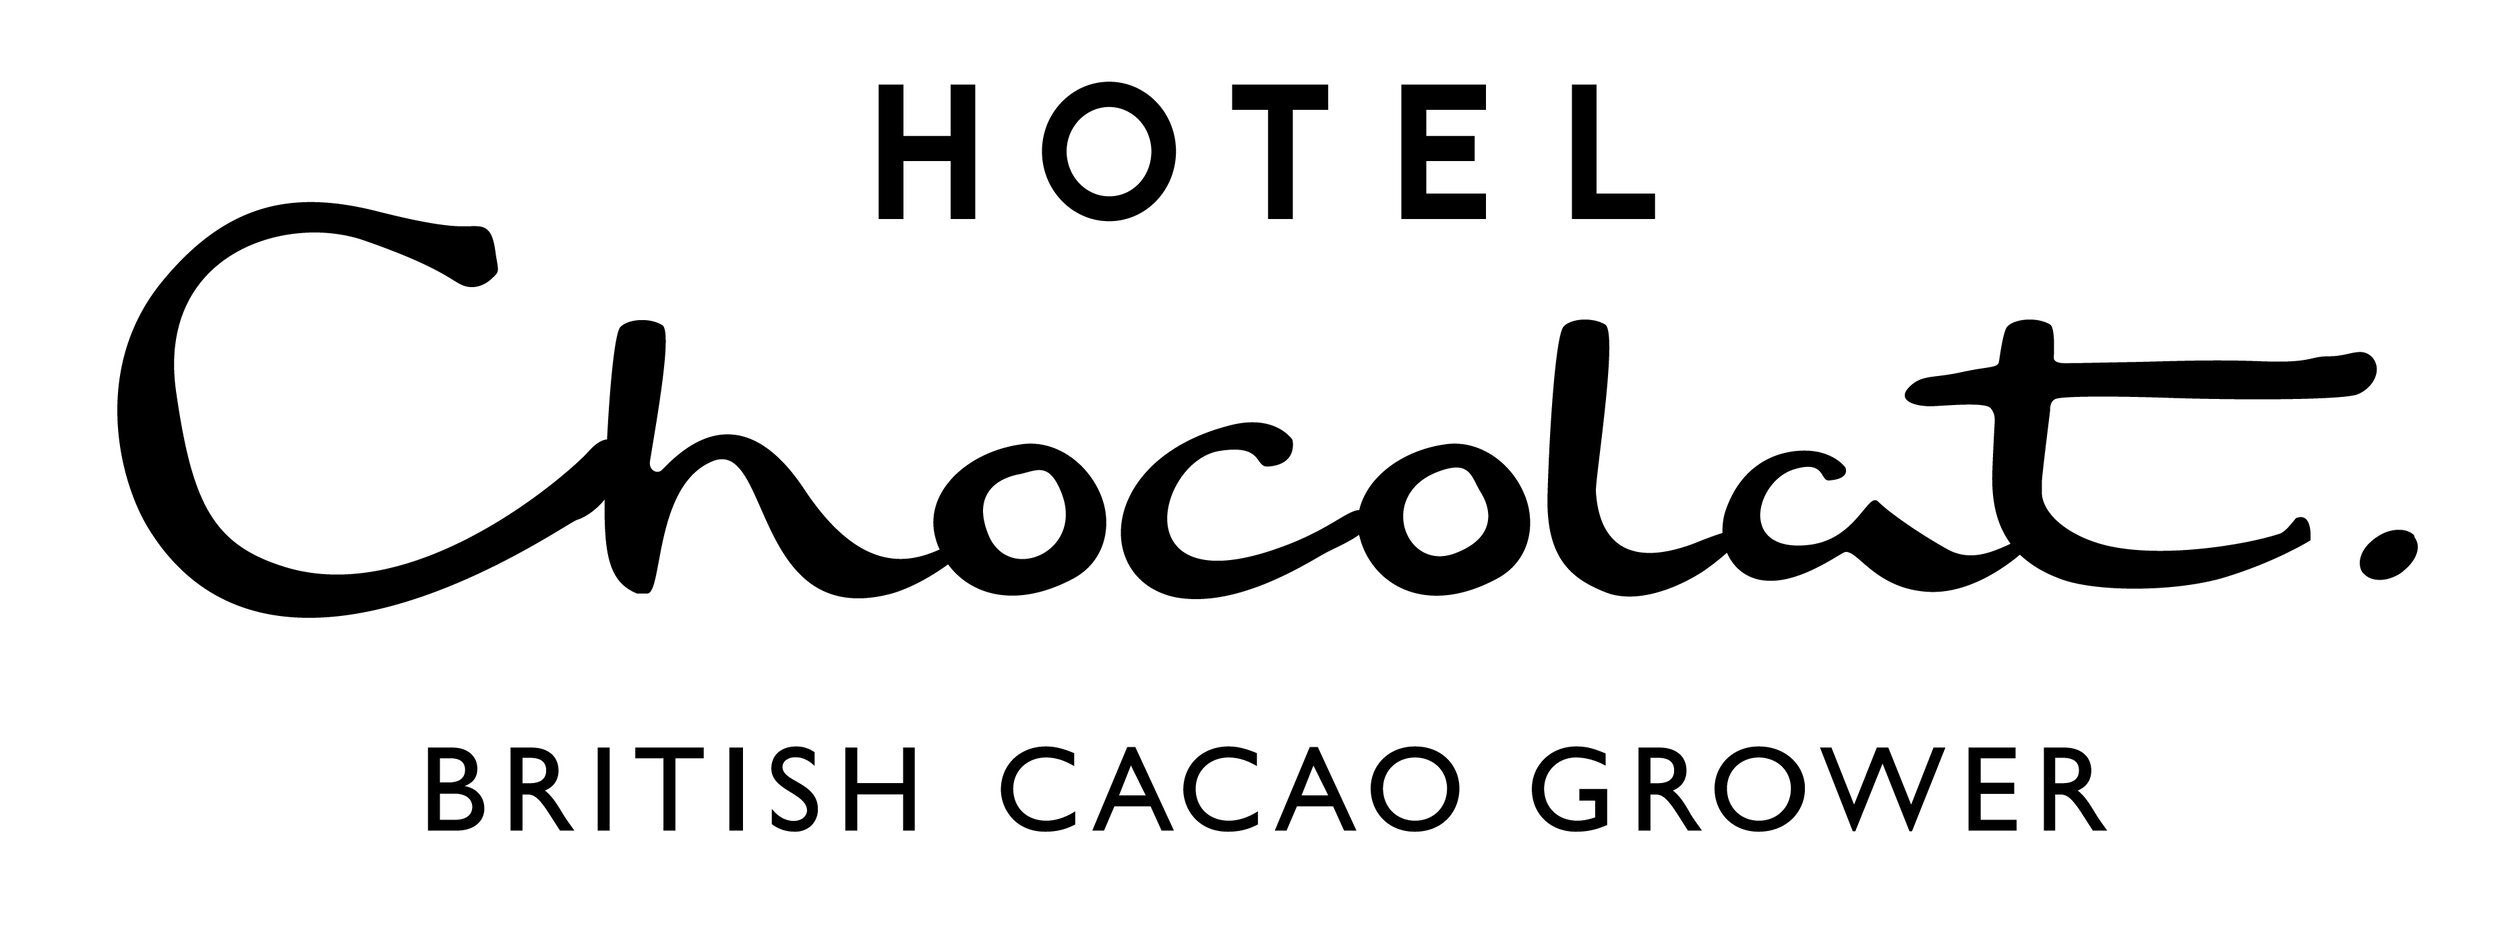 CACAO HC_FINAL_STACKED_LOGO_2019 (2).jpg